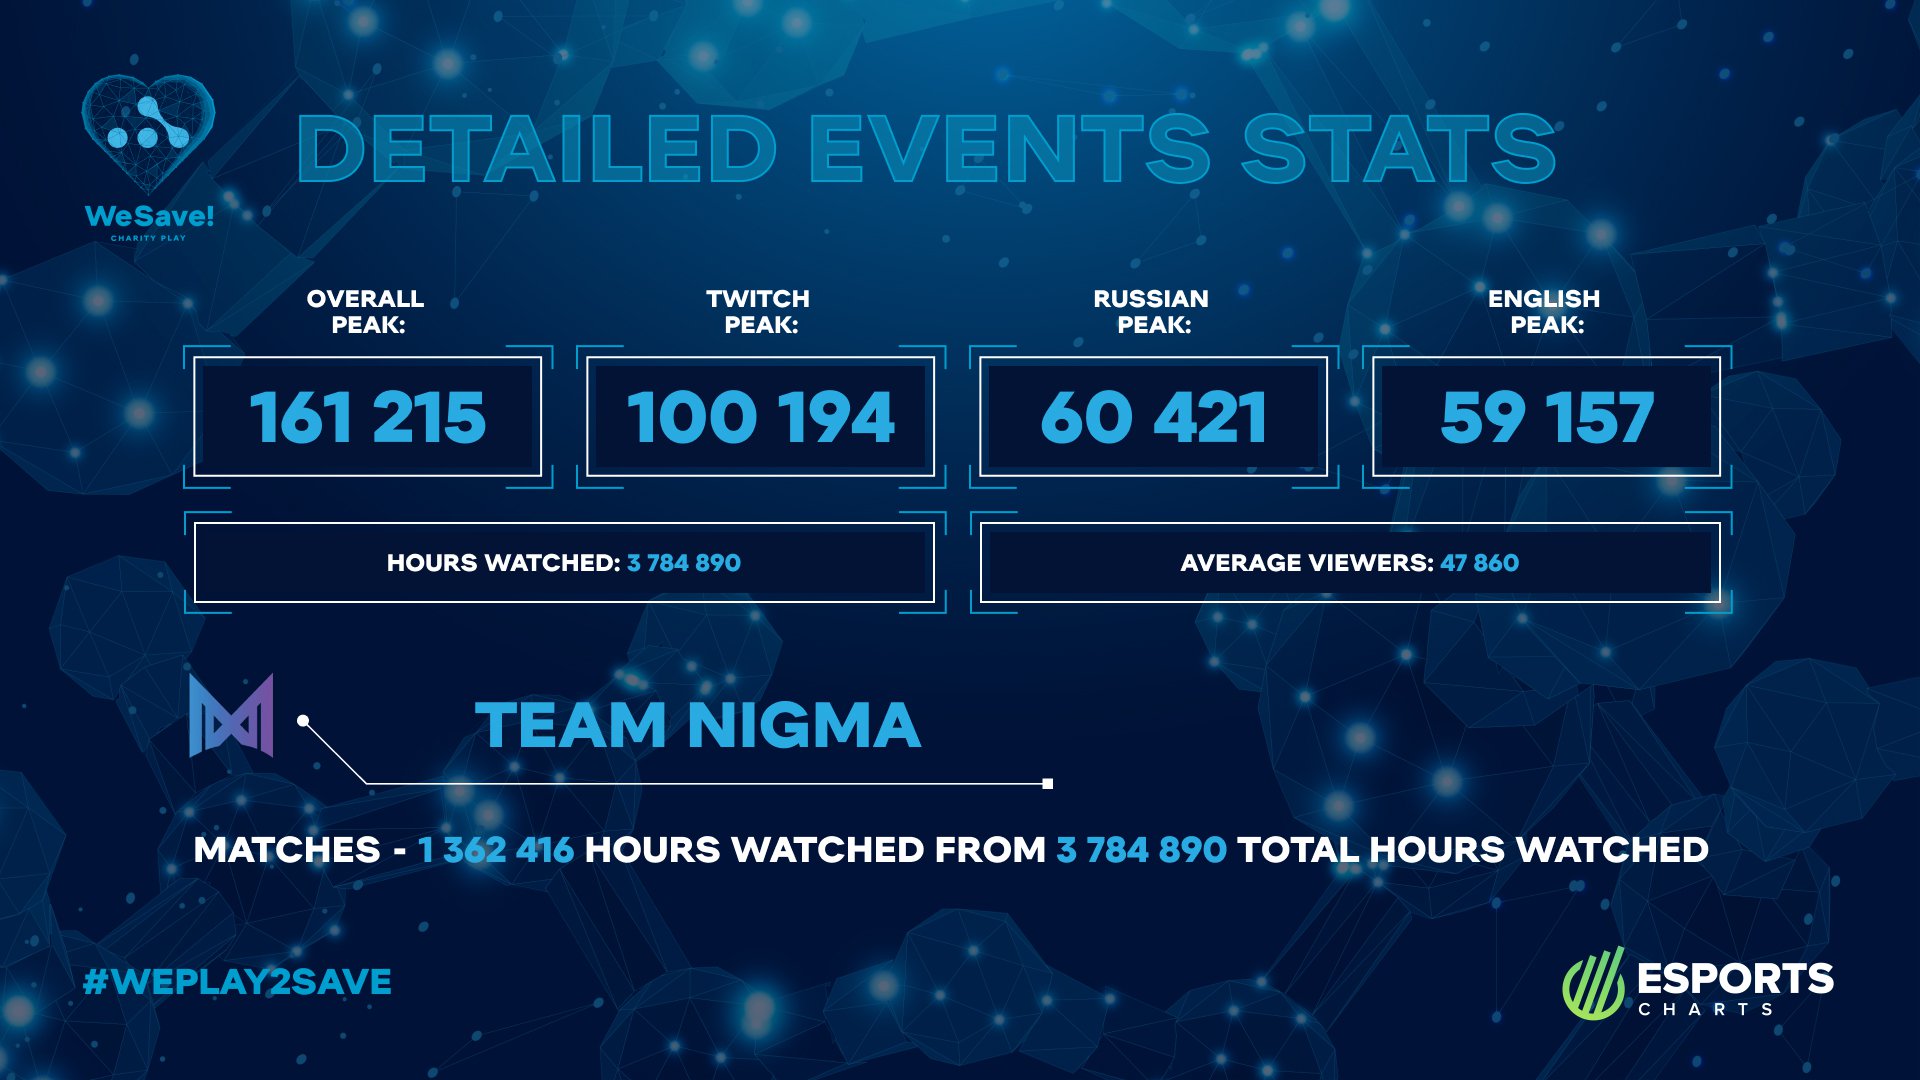 Detailed events stats